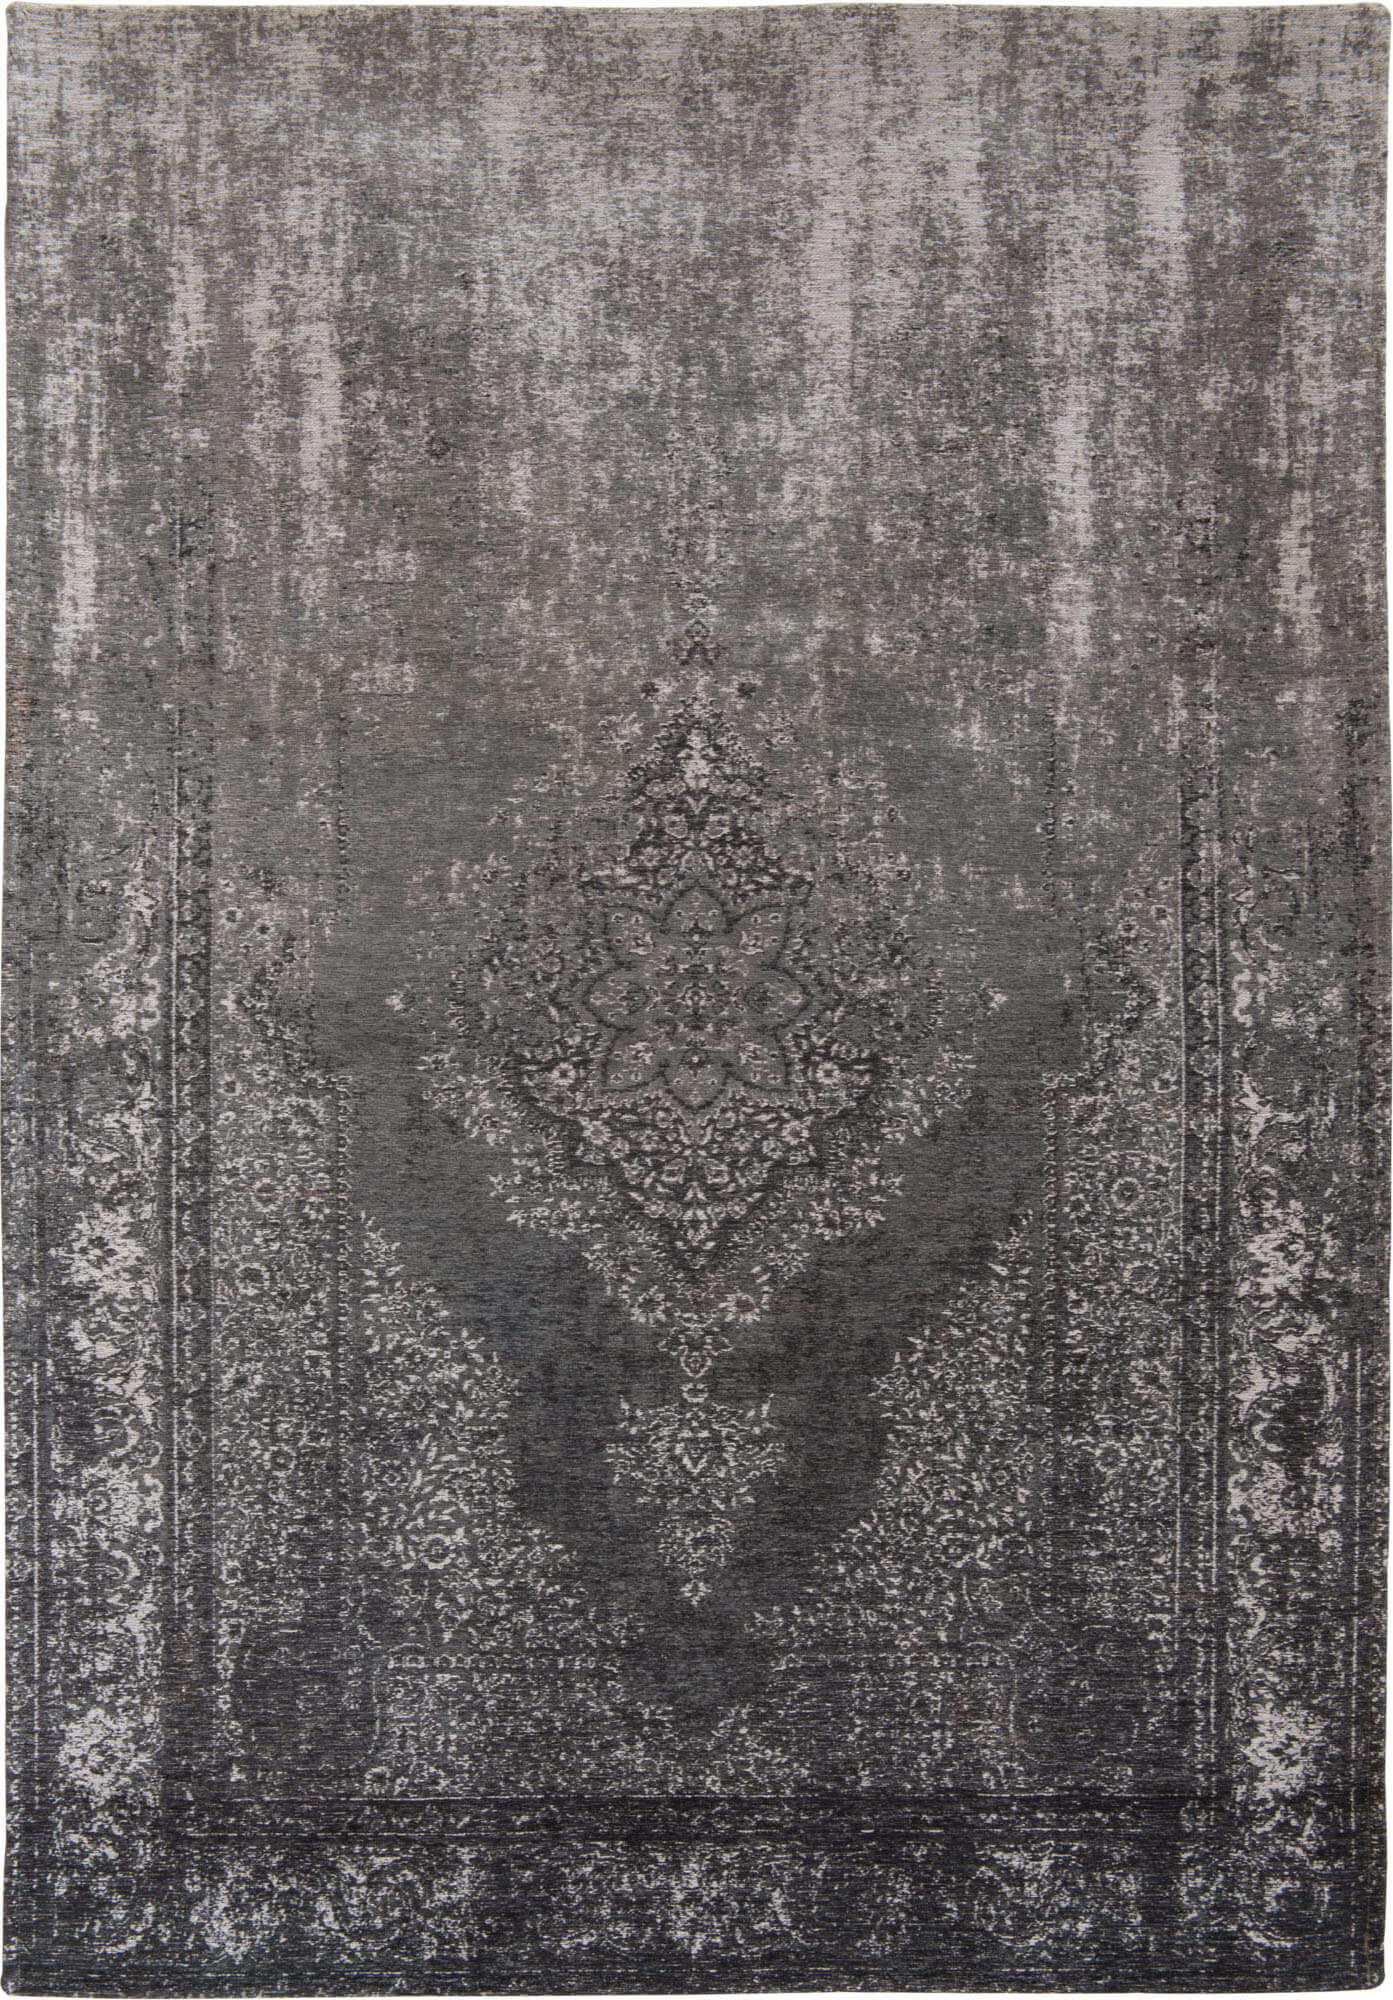 Persian Vintage Style Rug Grey Neutral ☞ Size: 60 x 90 cm